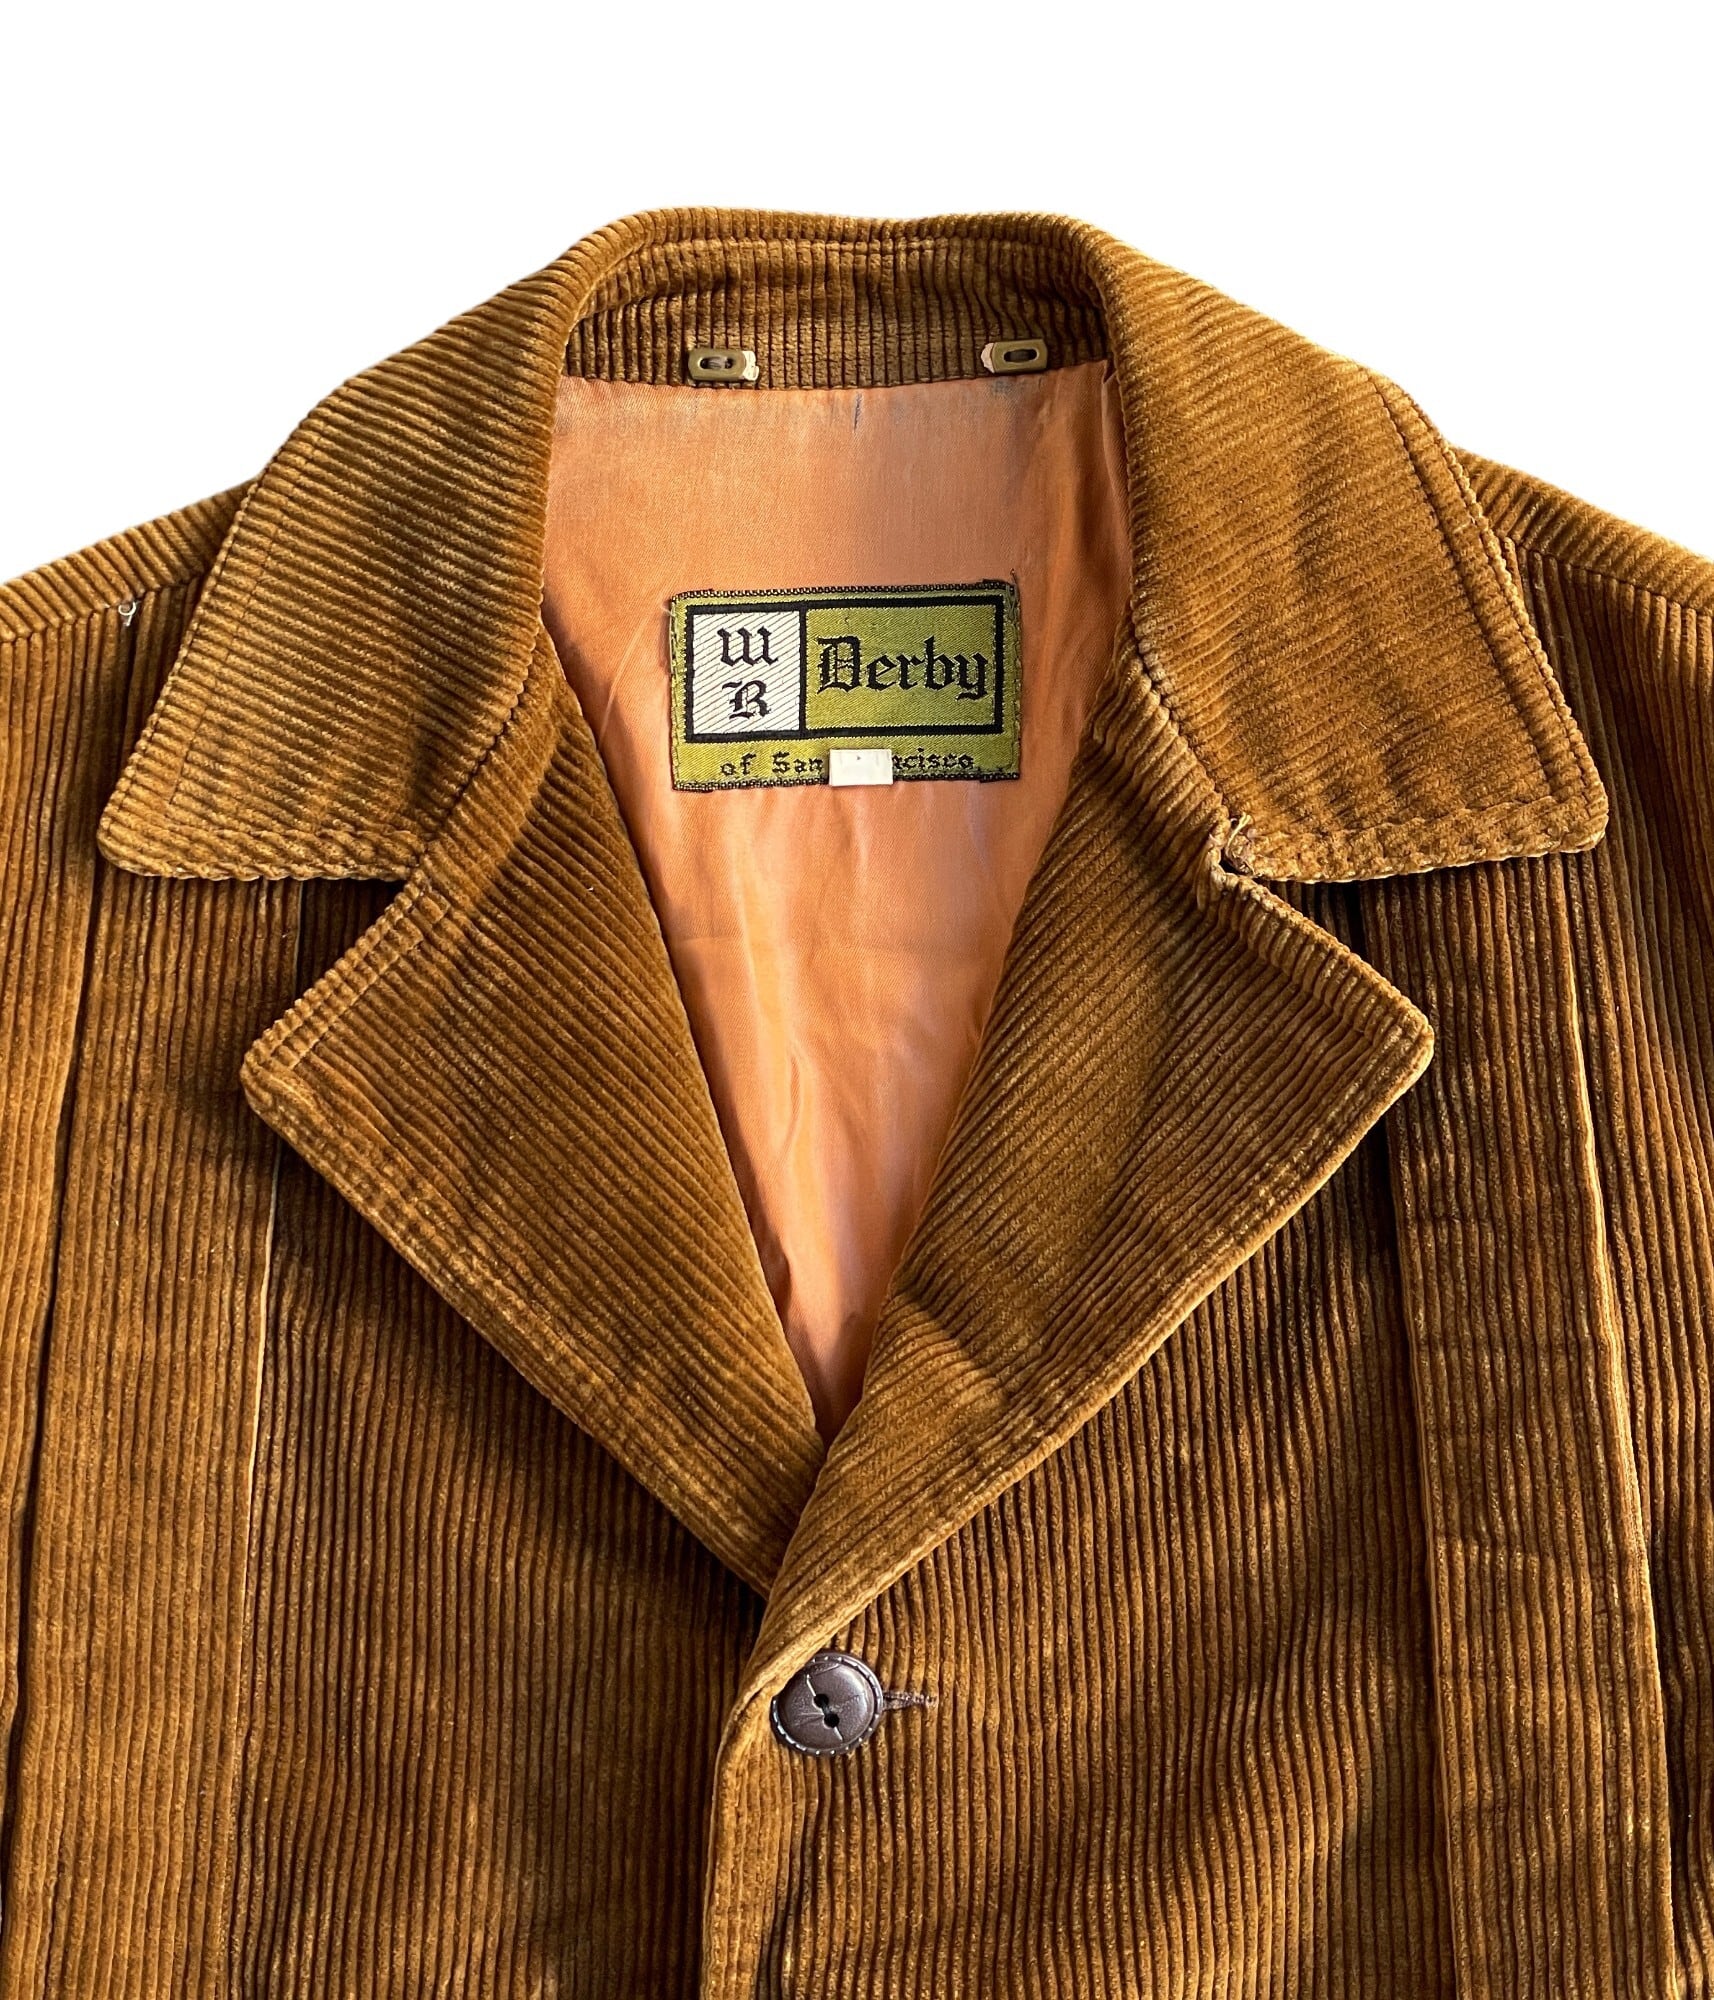 Vintage 60s corduroy jacket -Derby of San Francisco- | BEGGARS  BANQUET公式通販サイト　古着・ヴィンテージ